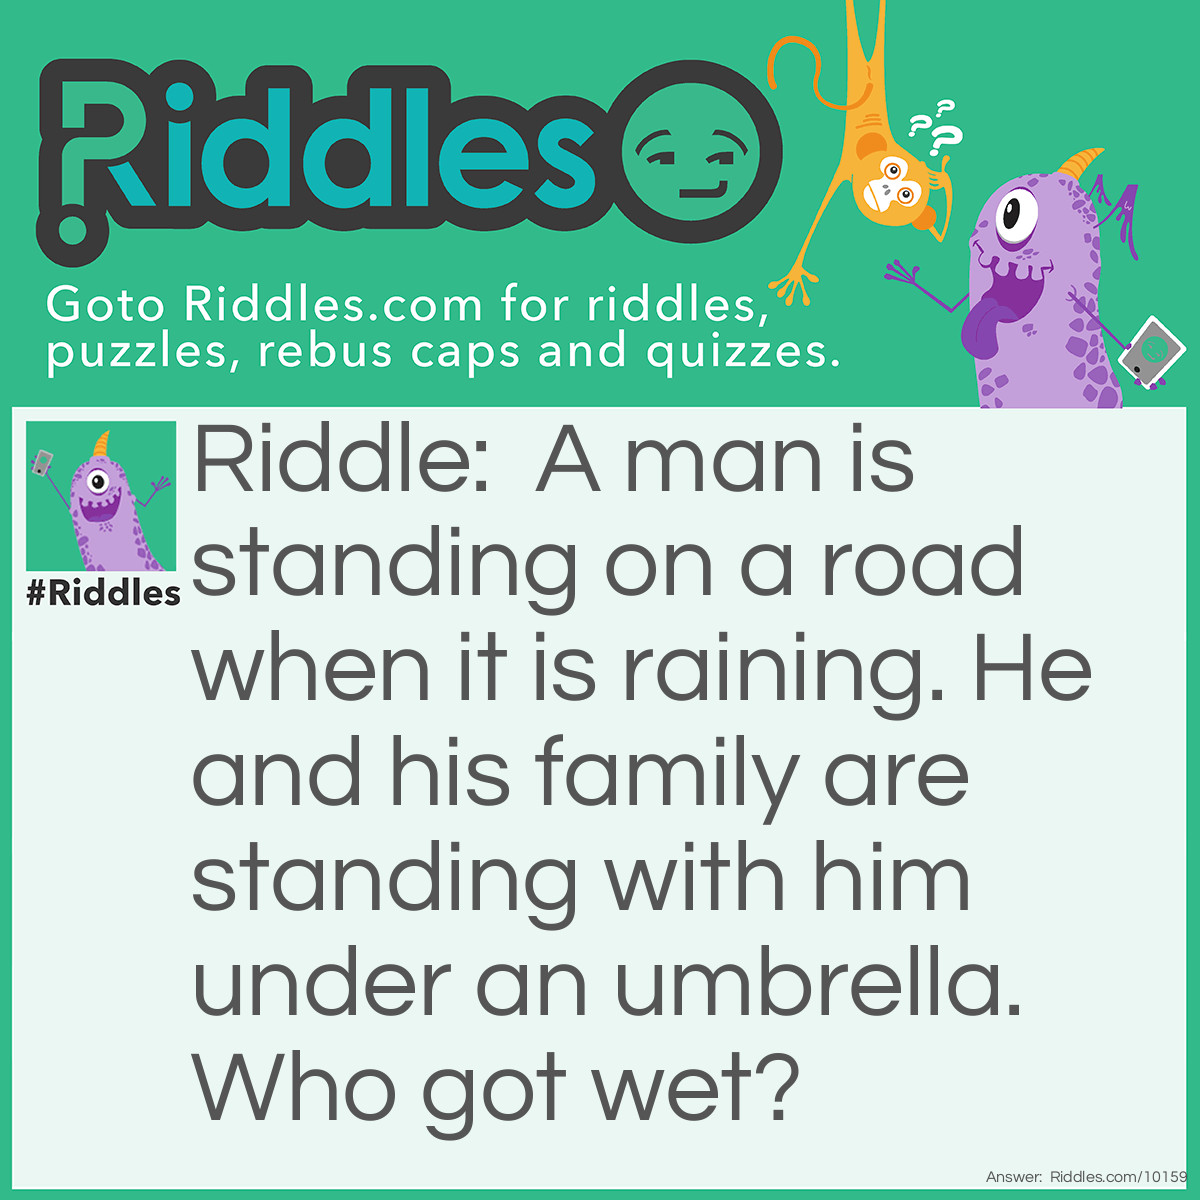 Riddle: A man is standing on a road when it is raining. He and his family are standing with him under an umbrella. Who got wet? Answer: The Umbrella.